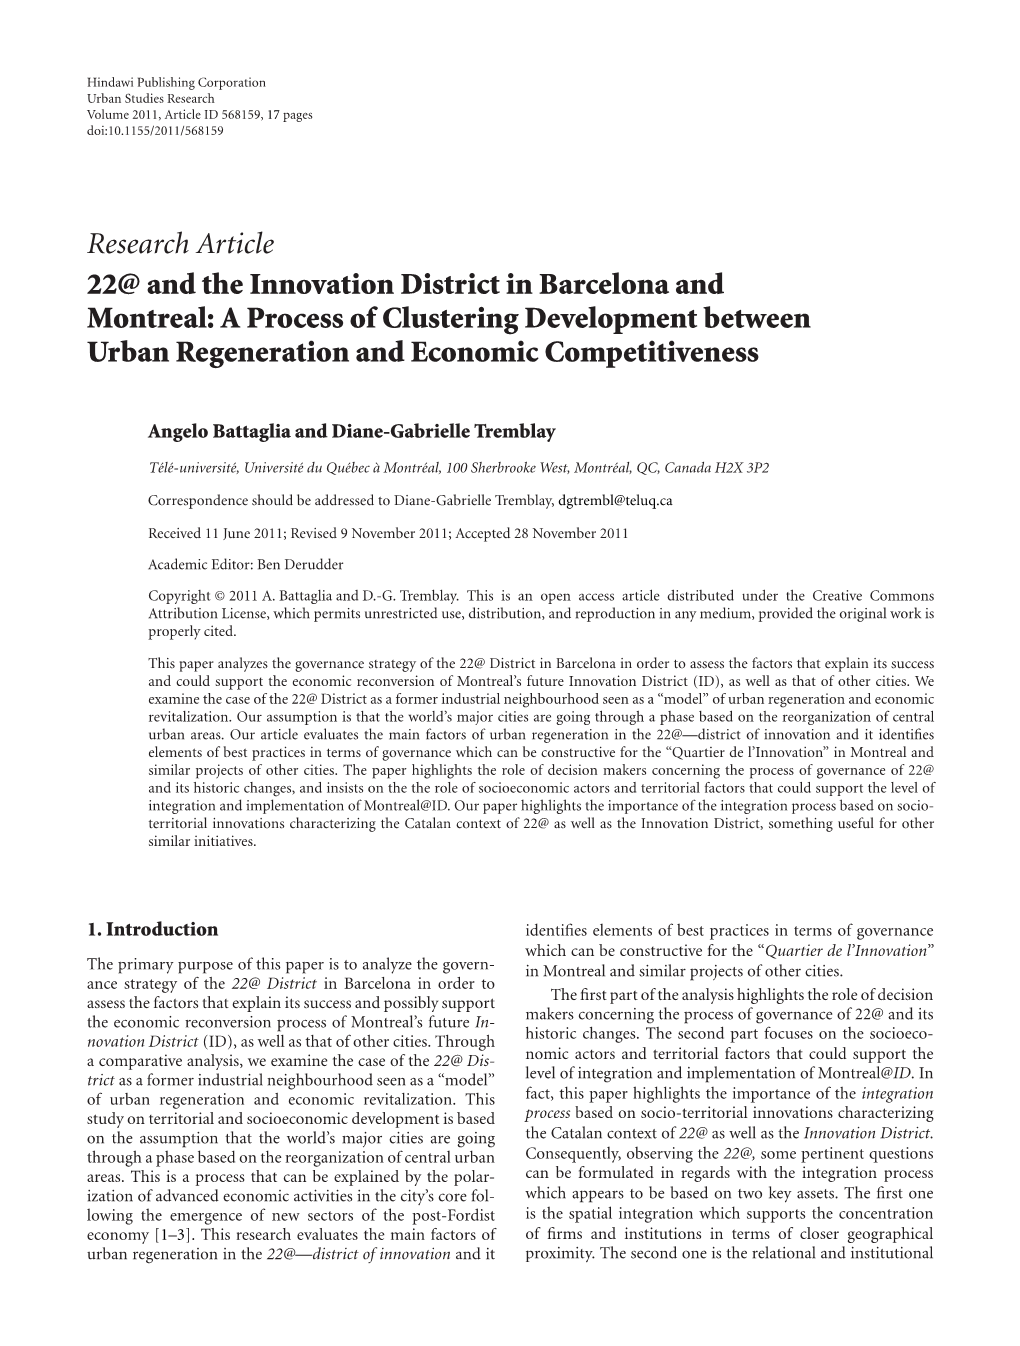 22@ and the Innovation District in Barcelona and Montreal: a Process of Clustering Development Between Urban Regeneration and Economic Competitiveness